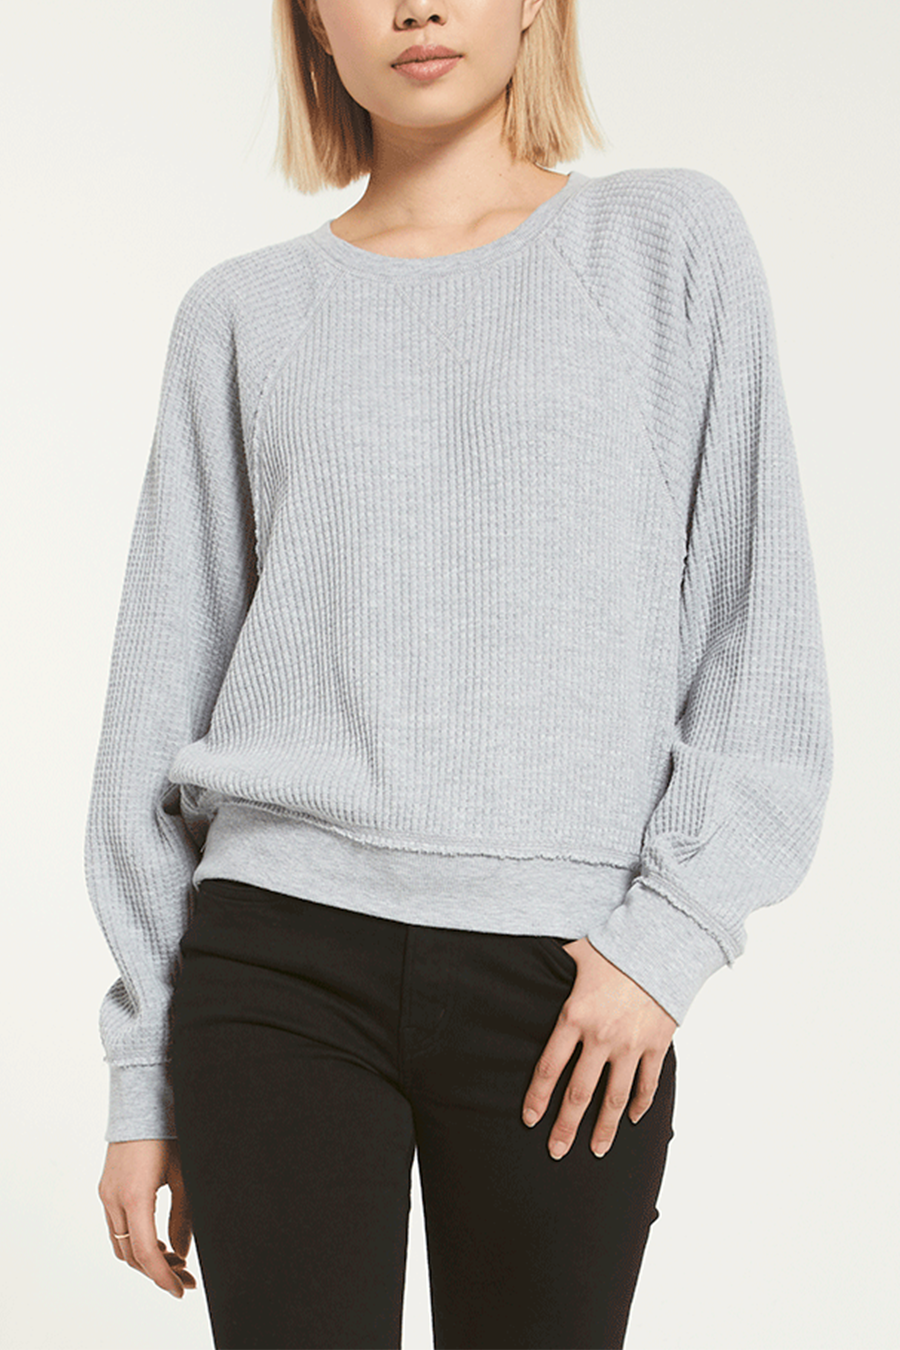 Claire Waffle Long Sleeve | H. Grey - Main Image Number 1 of 2